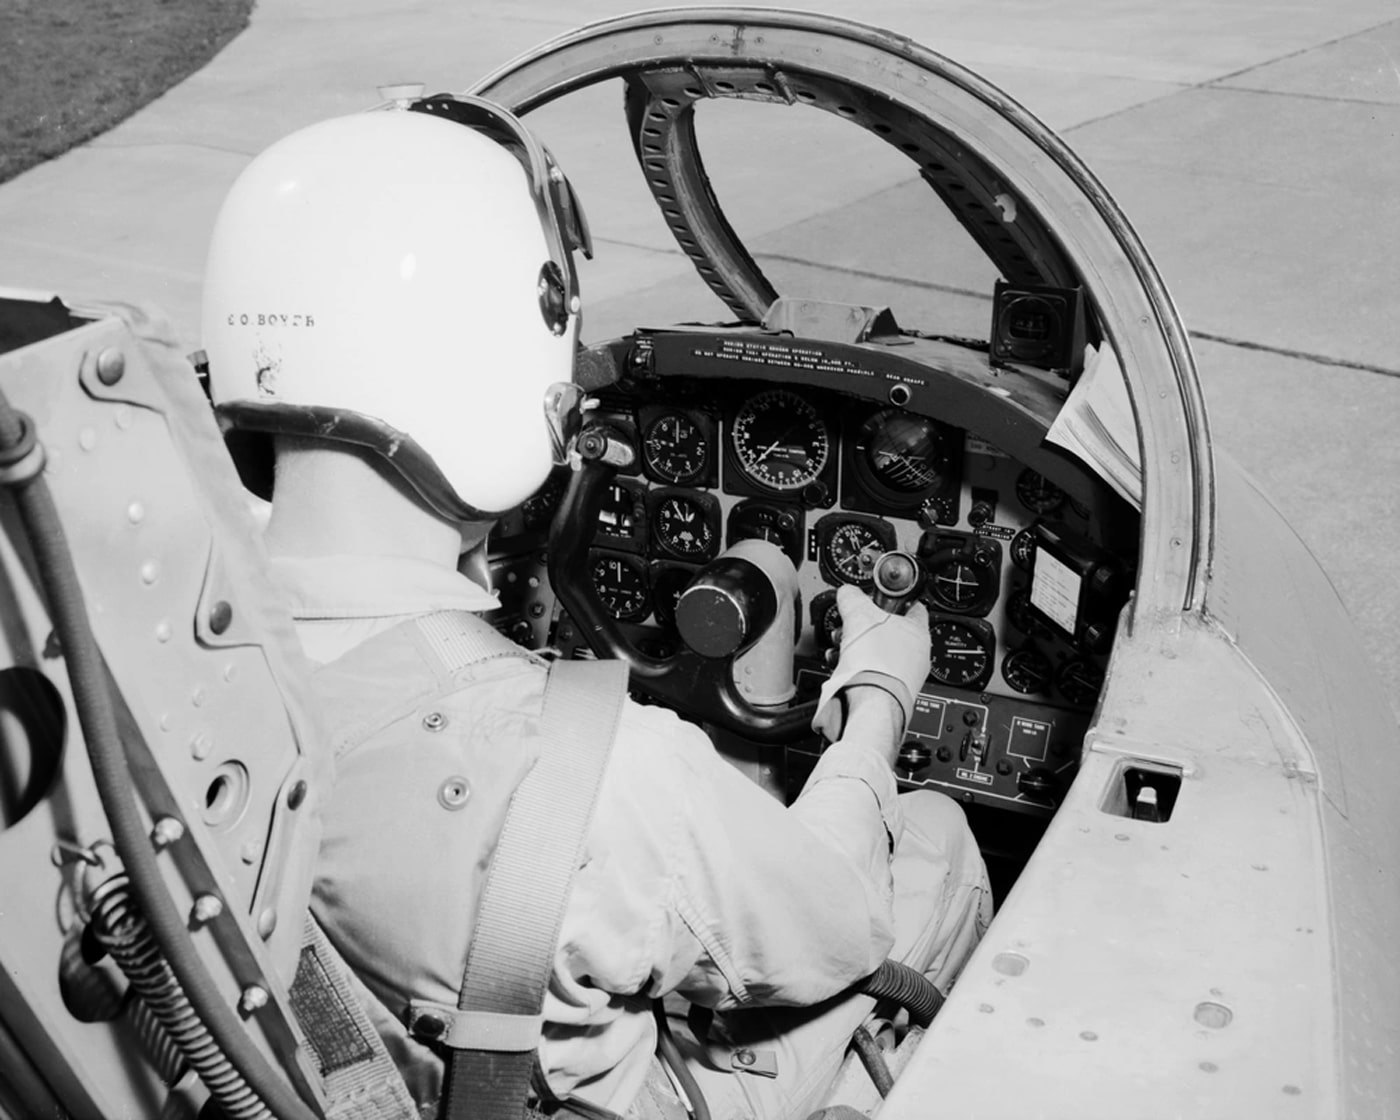 In this photograph we see a B-57 cockpit with the instrument panel. The cockpit is more akin to a fighter than a strategic bomber.